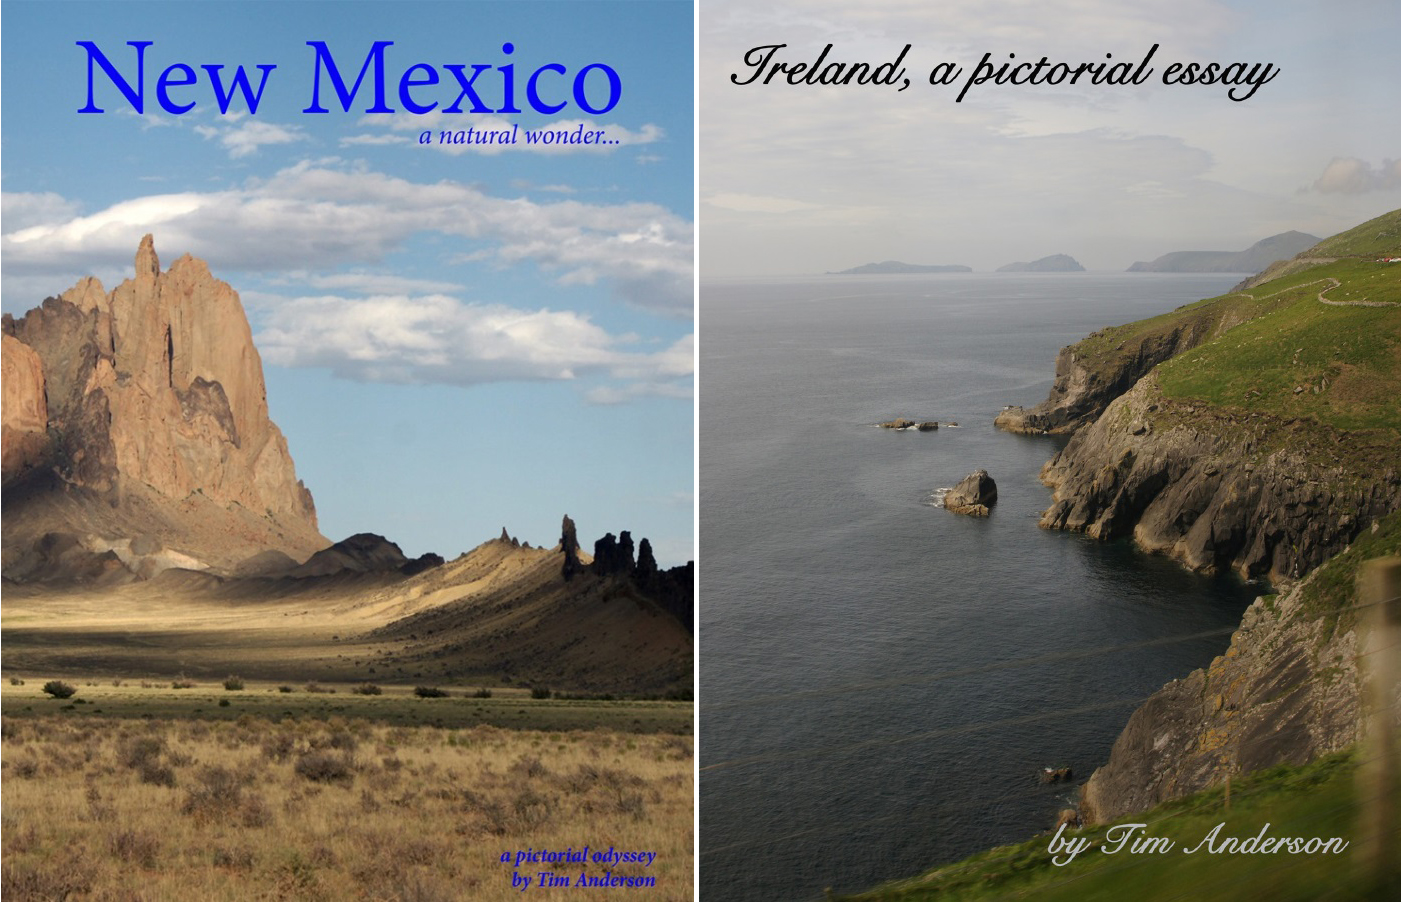 the-journal-new-mexico-natural-wonder-ireland-covers